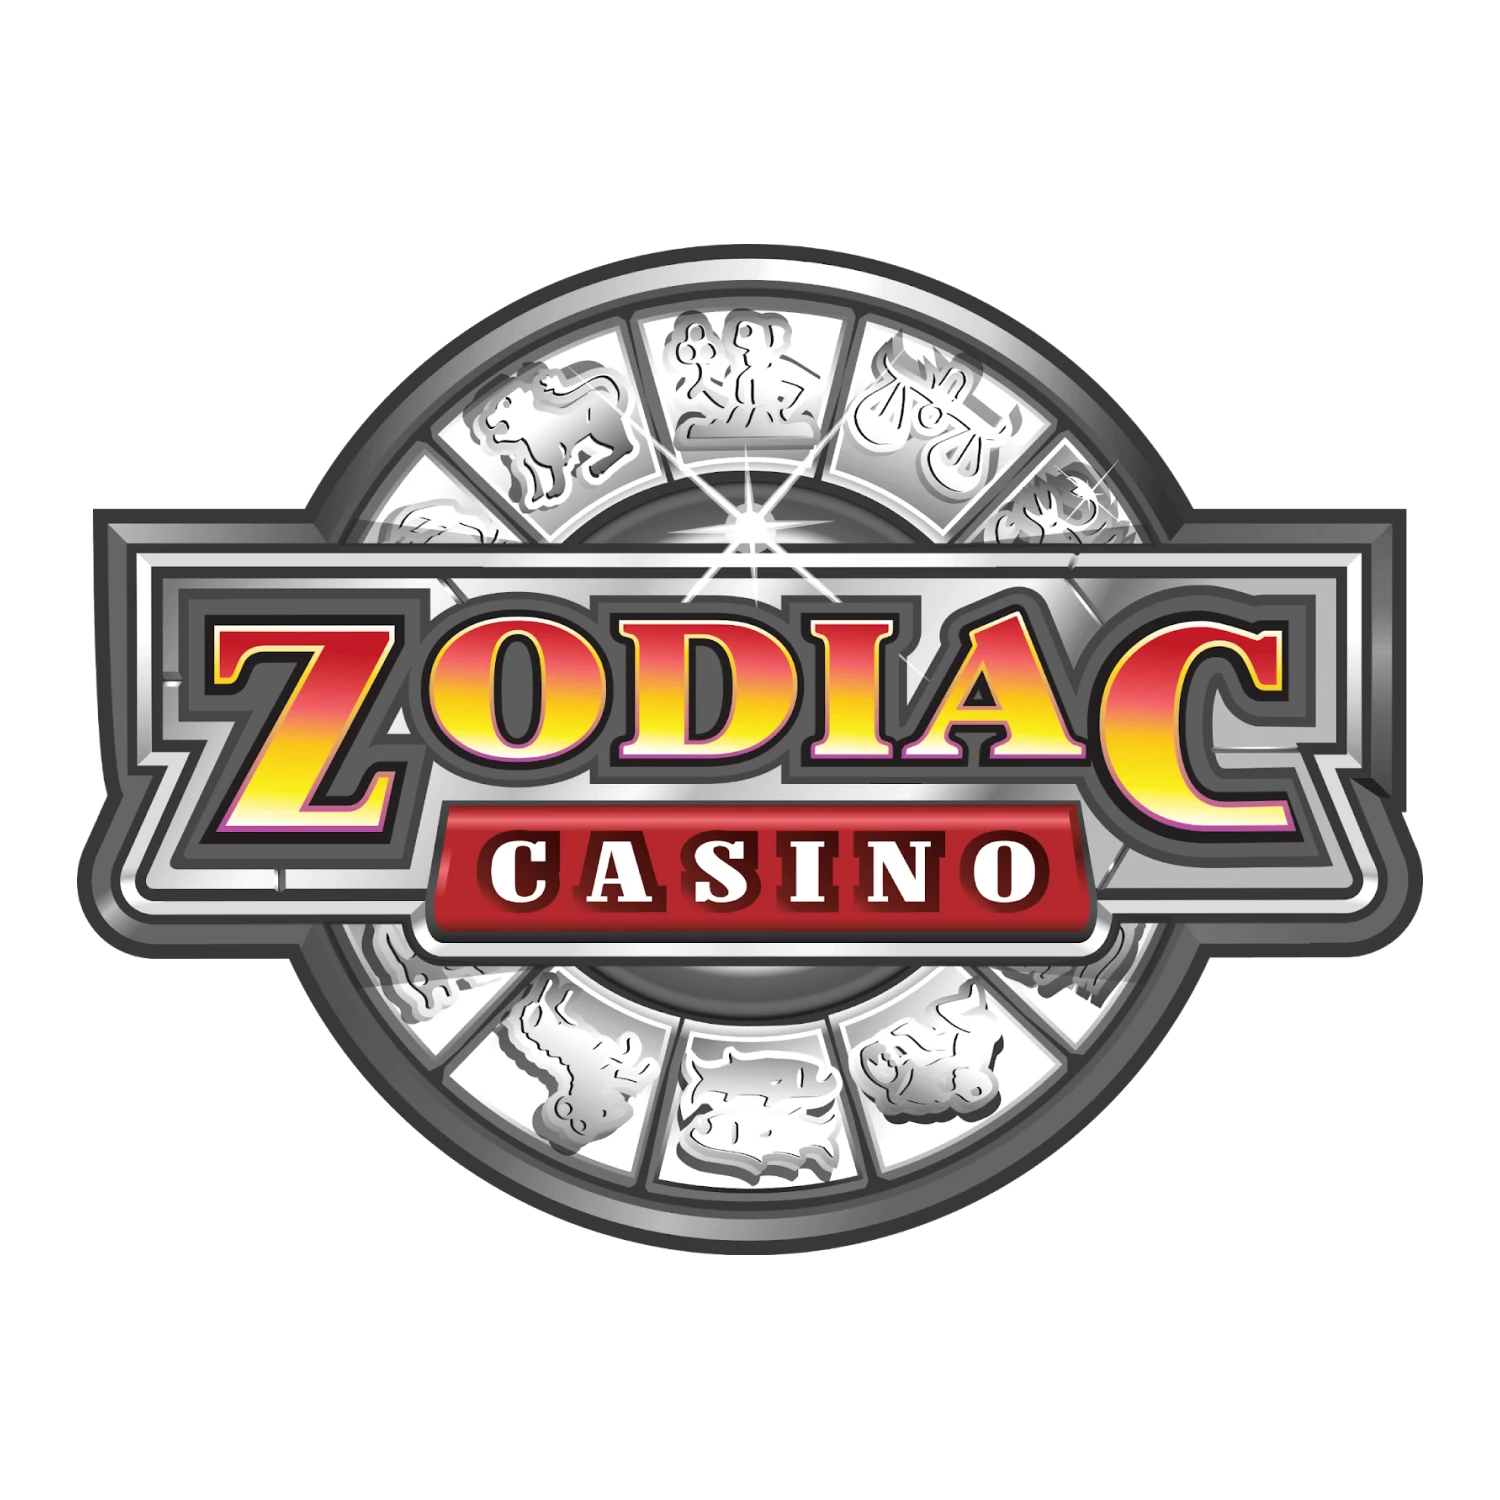 Try your luck at Zodiac casino.